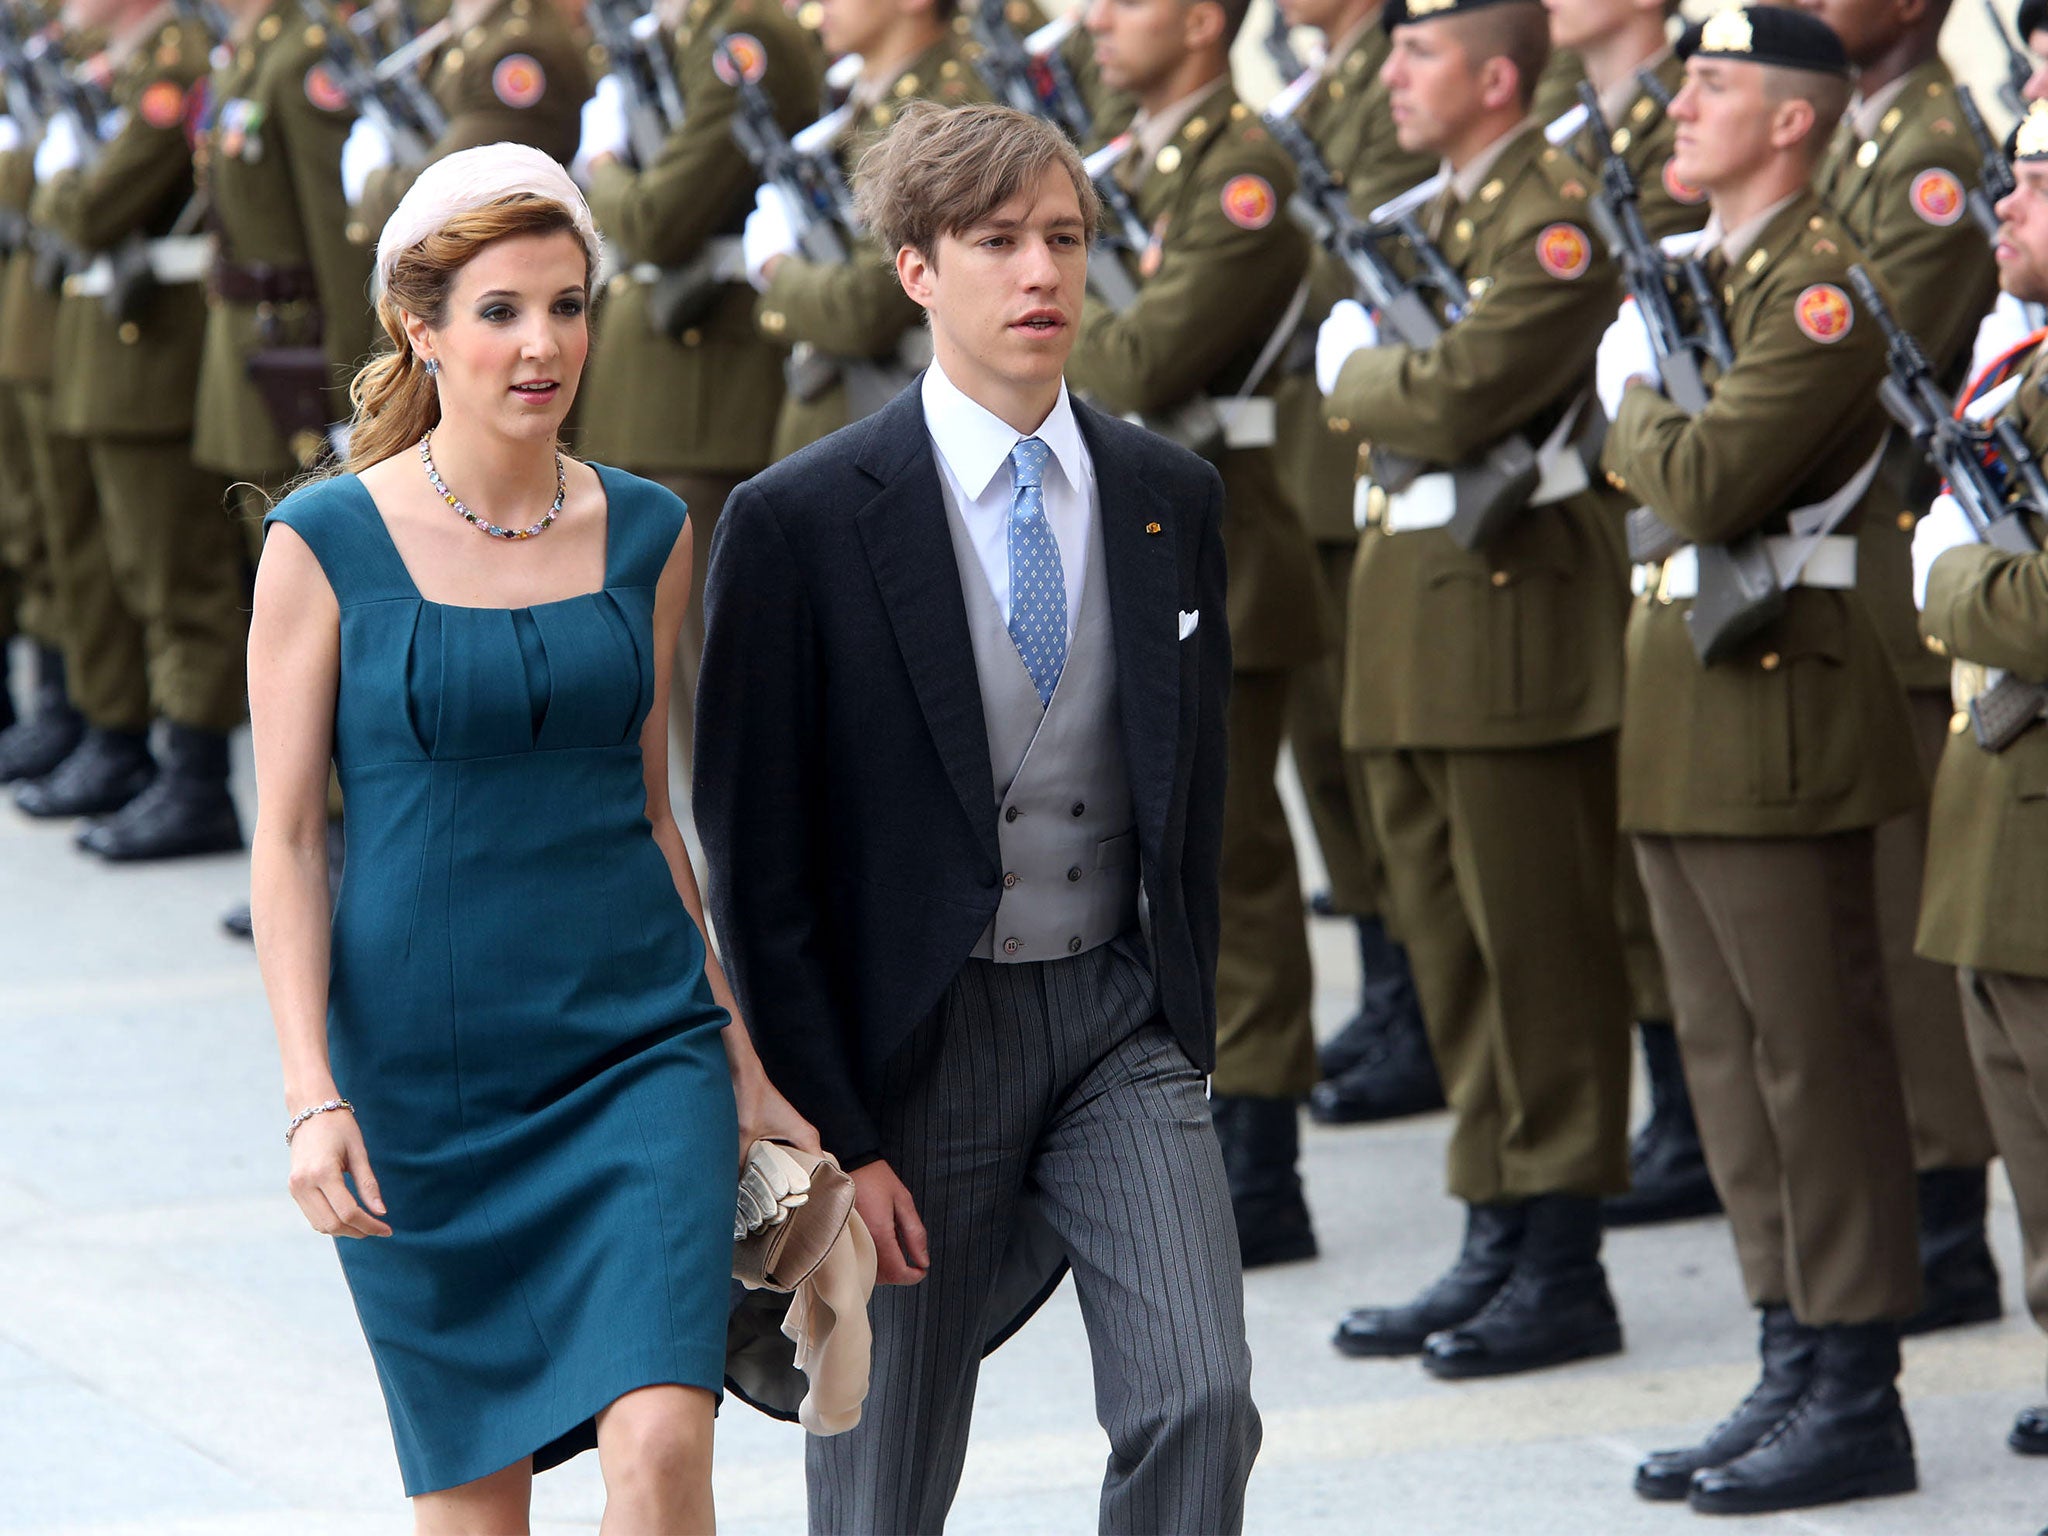 Prince Louis and Princess Tessy of Luxembourg were married between 2006 and 2017